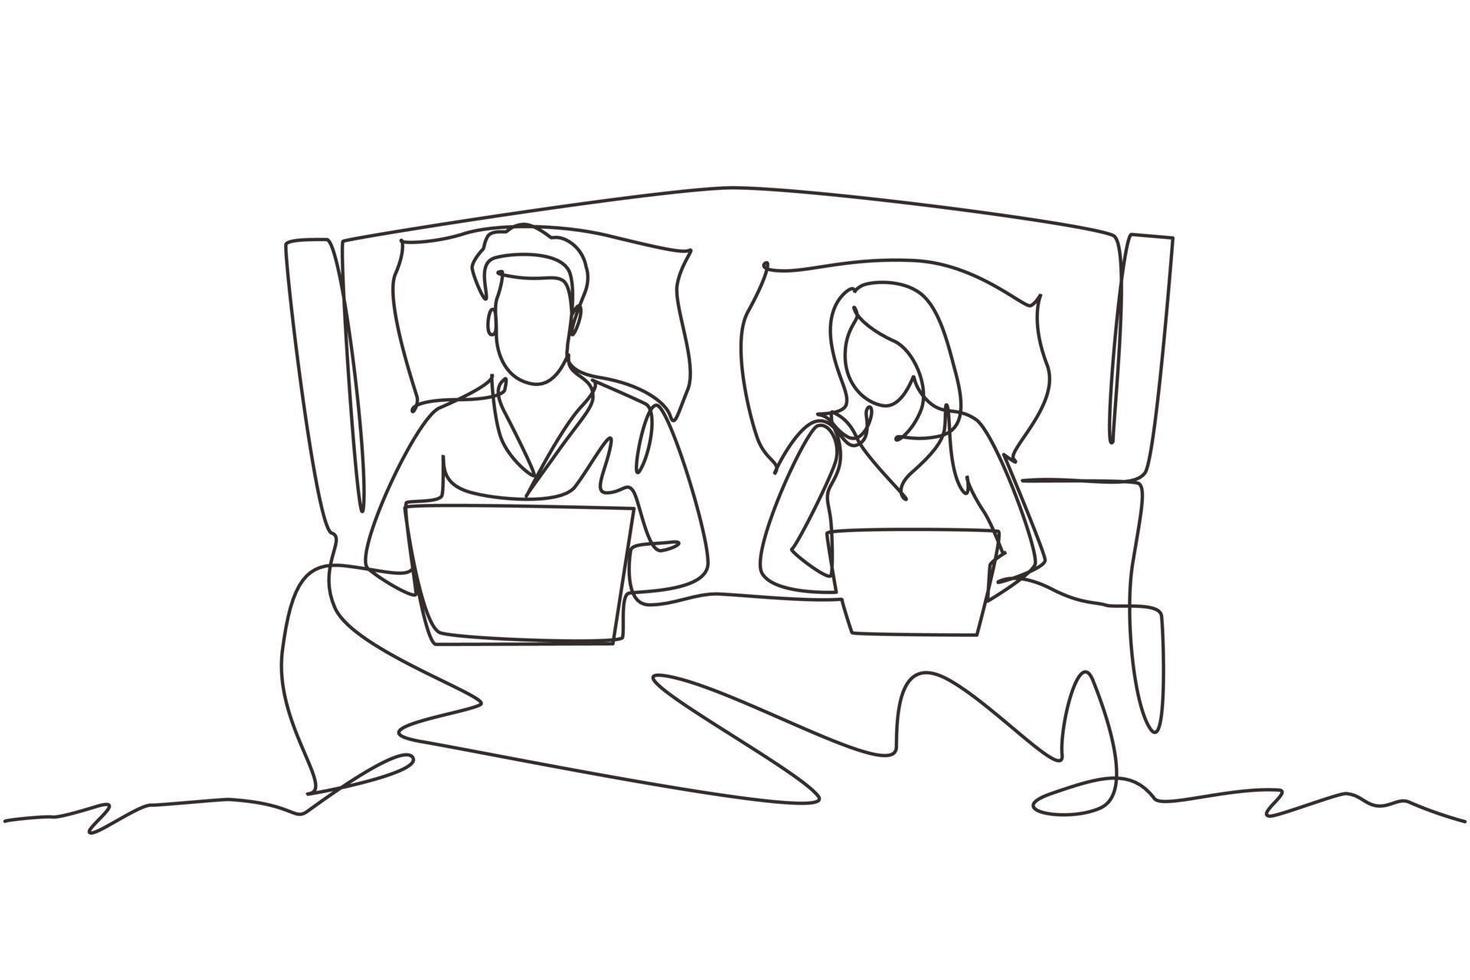 Continuous one line drawing Couple in bed. Man and woman with laptop surfing internet. Happy marriage activity before sleep. Romantic couple resting at bedroom. Single line draw design vector graphic